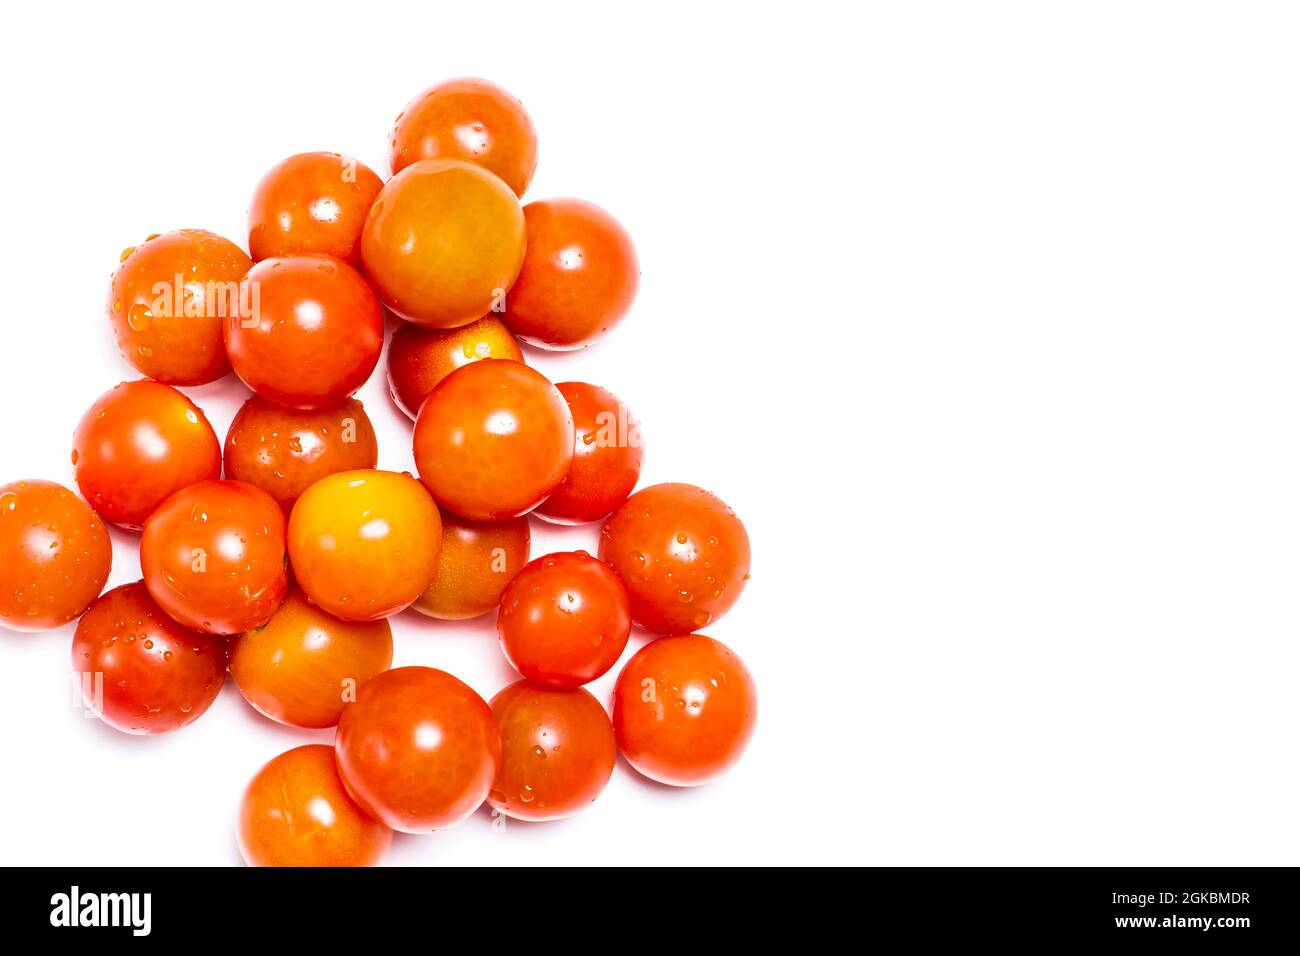 Overhead shot of tomatoes little ones natural reds on a white background. The photograph has copy space and is taken in horizontal format. Stock Photo